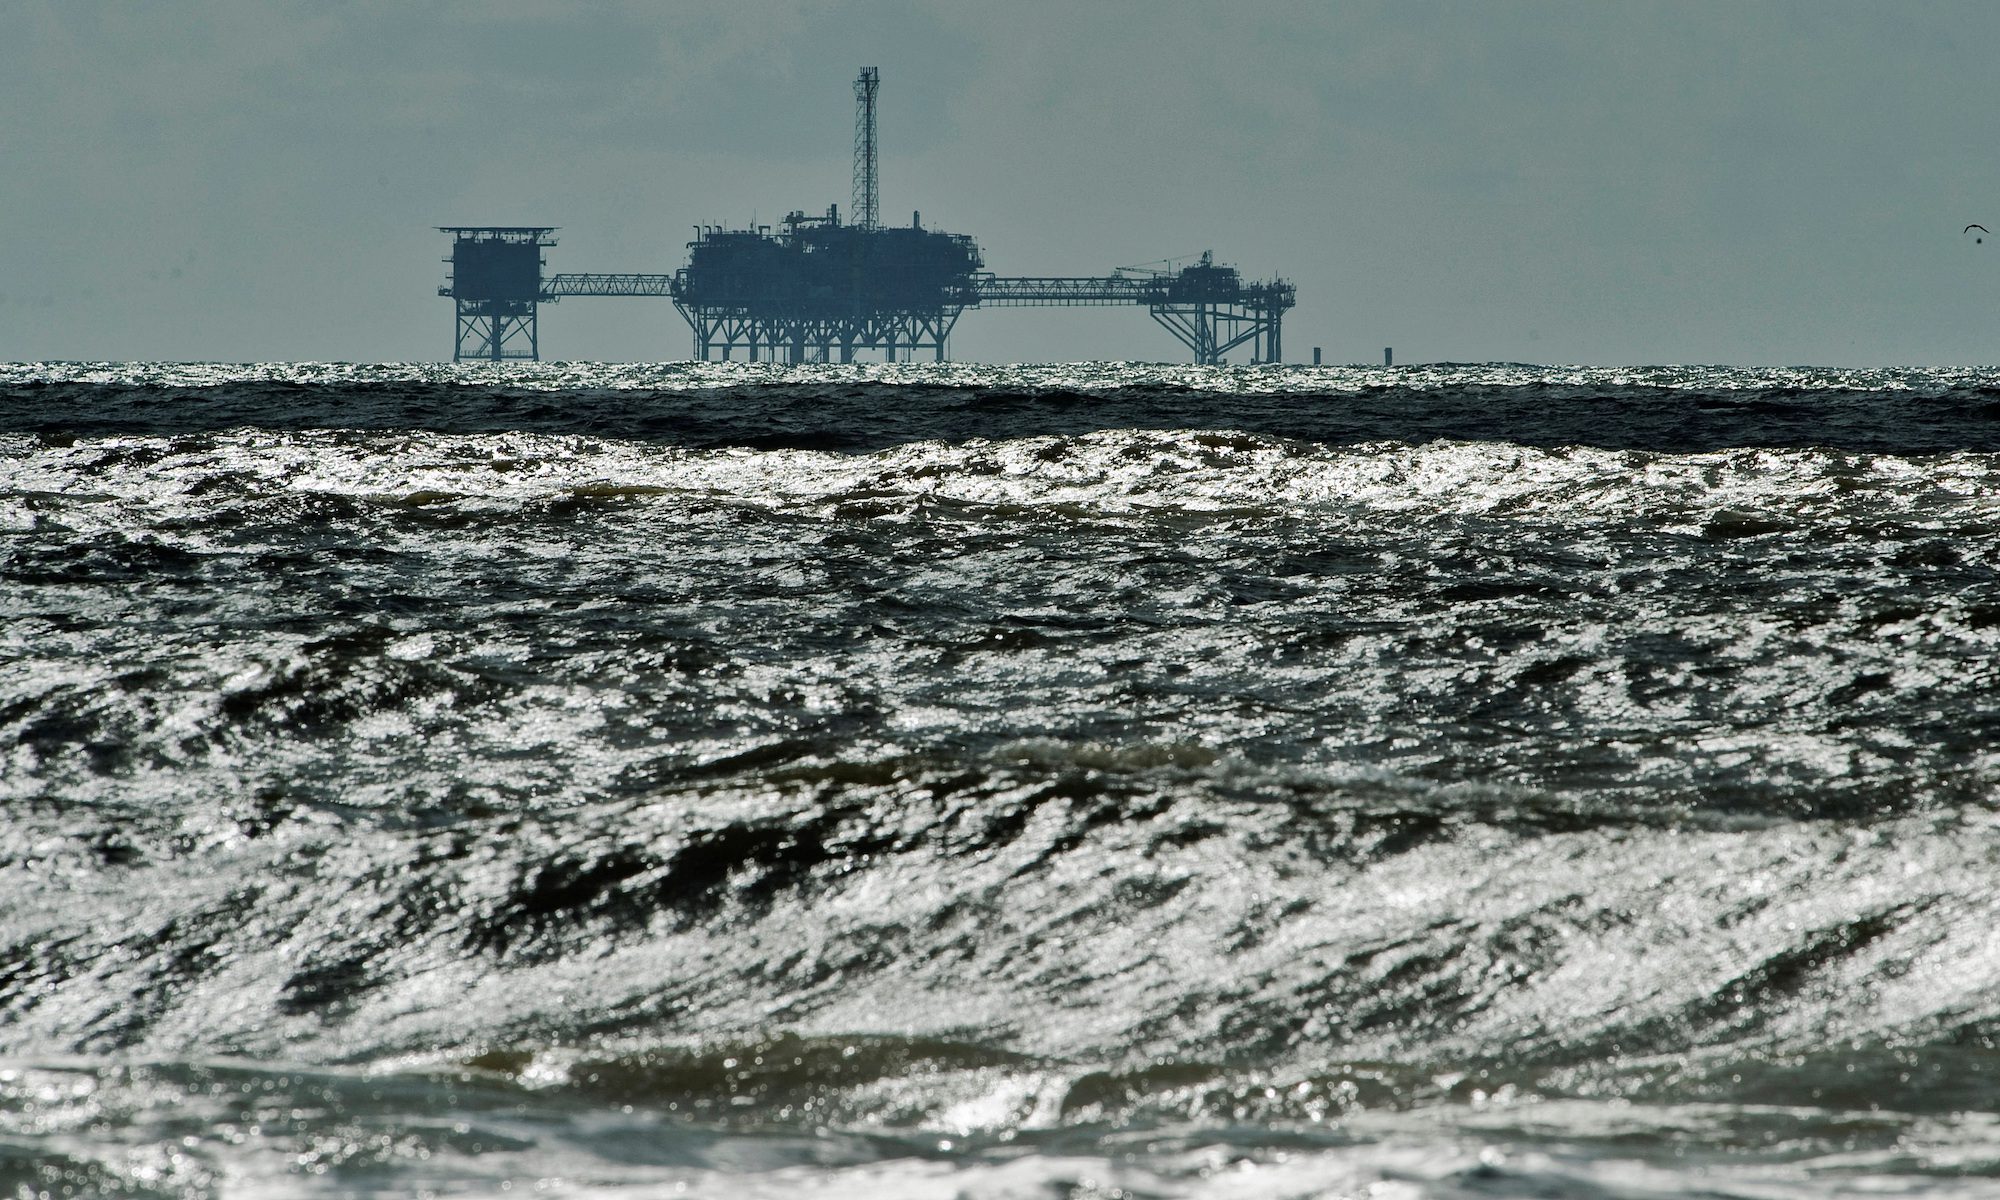 FILE PHOTO: An oil and gas drilling platform stands offshore in Alabama, October 5, 2013. REUTERS/Steve Nesius/File Photo